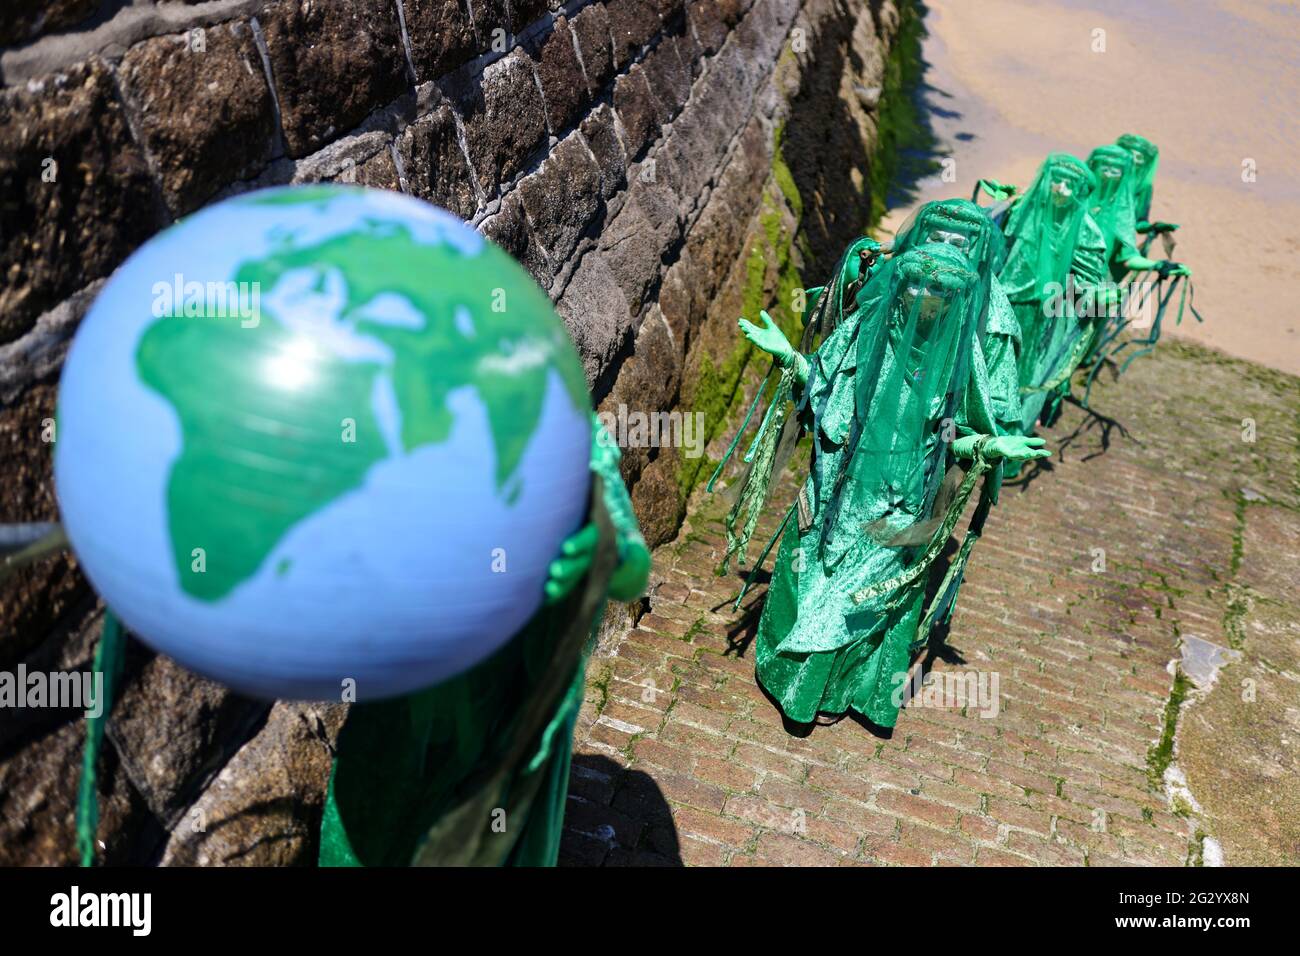 Extinction Rebellion activists protest in St Ives, during the G7 summit, in Cornwall, Britain, June 13, 2021. REUTERS/Tom Nicholson Stock Photo